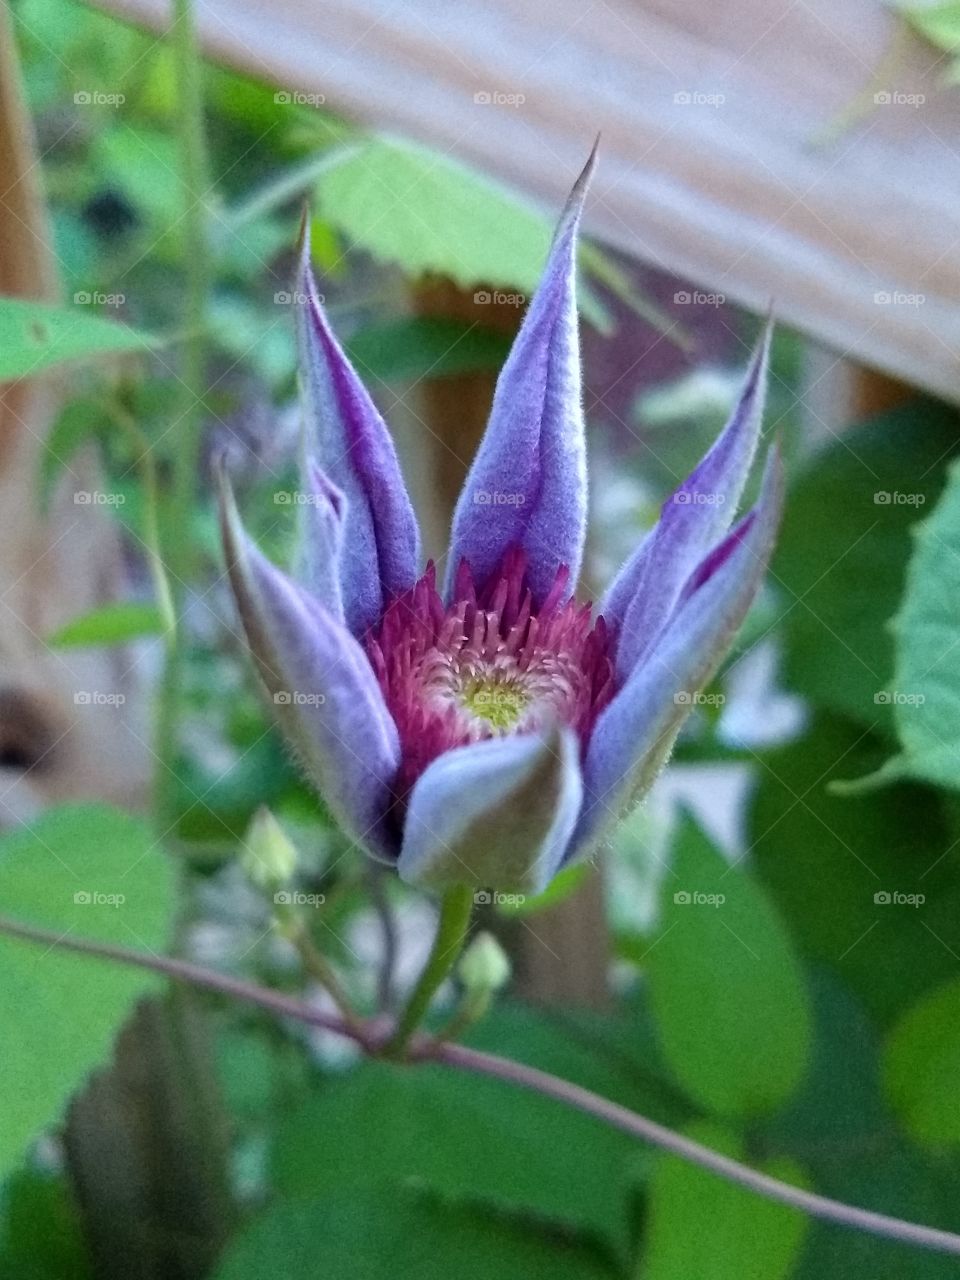 Clematis in my backyard